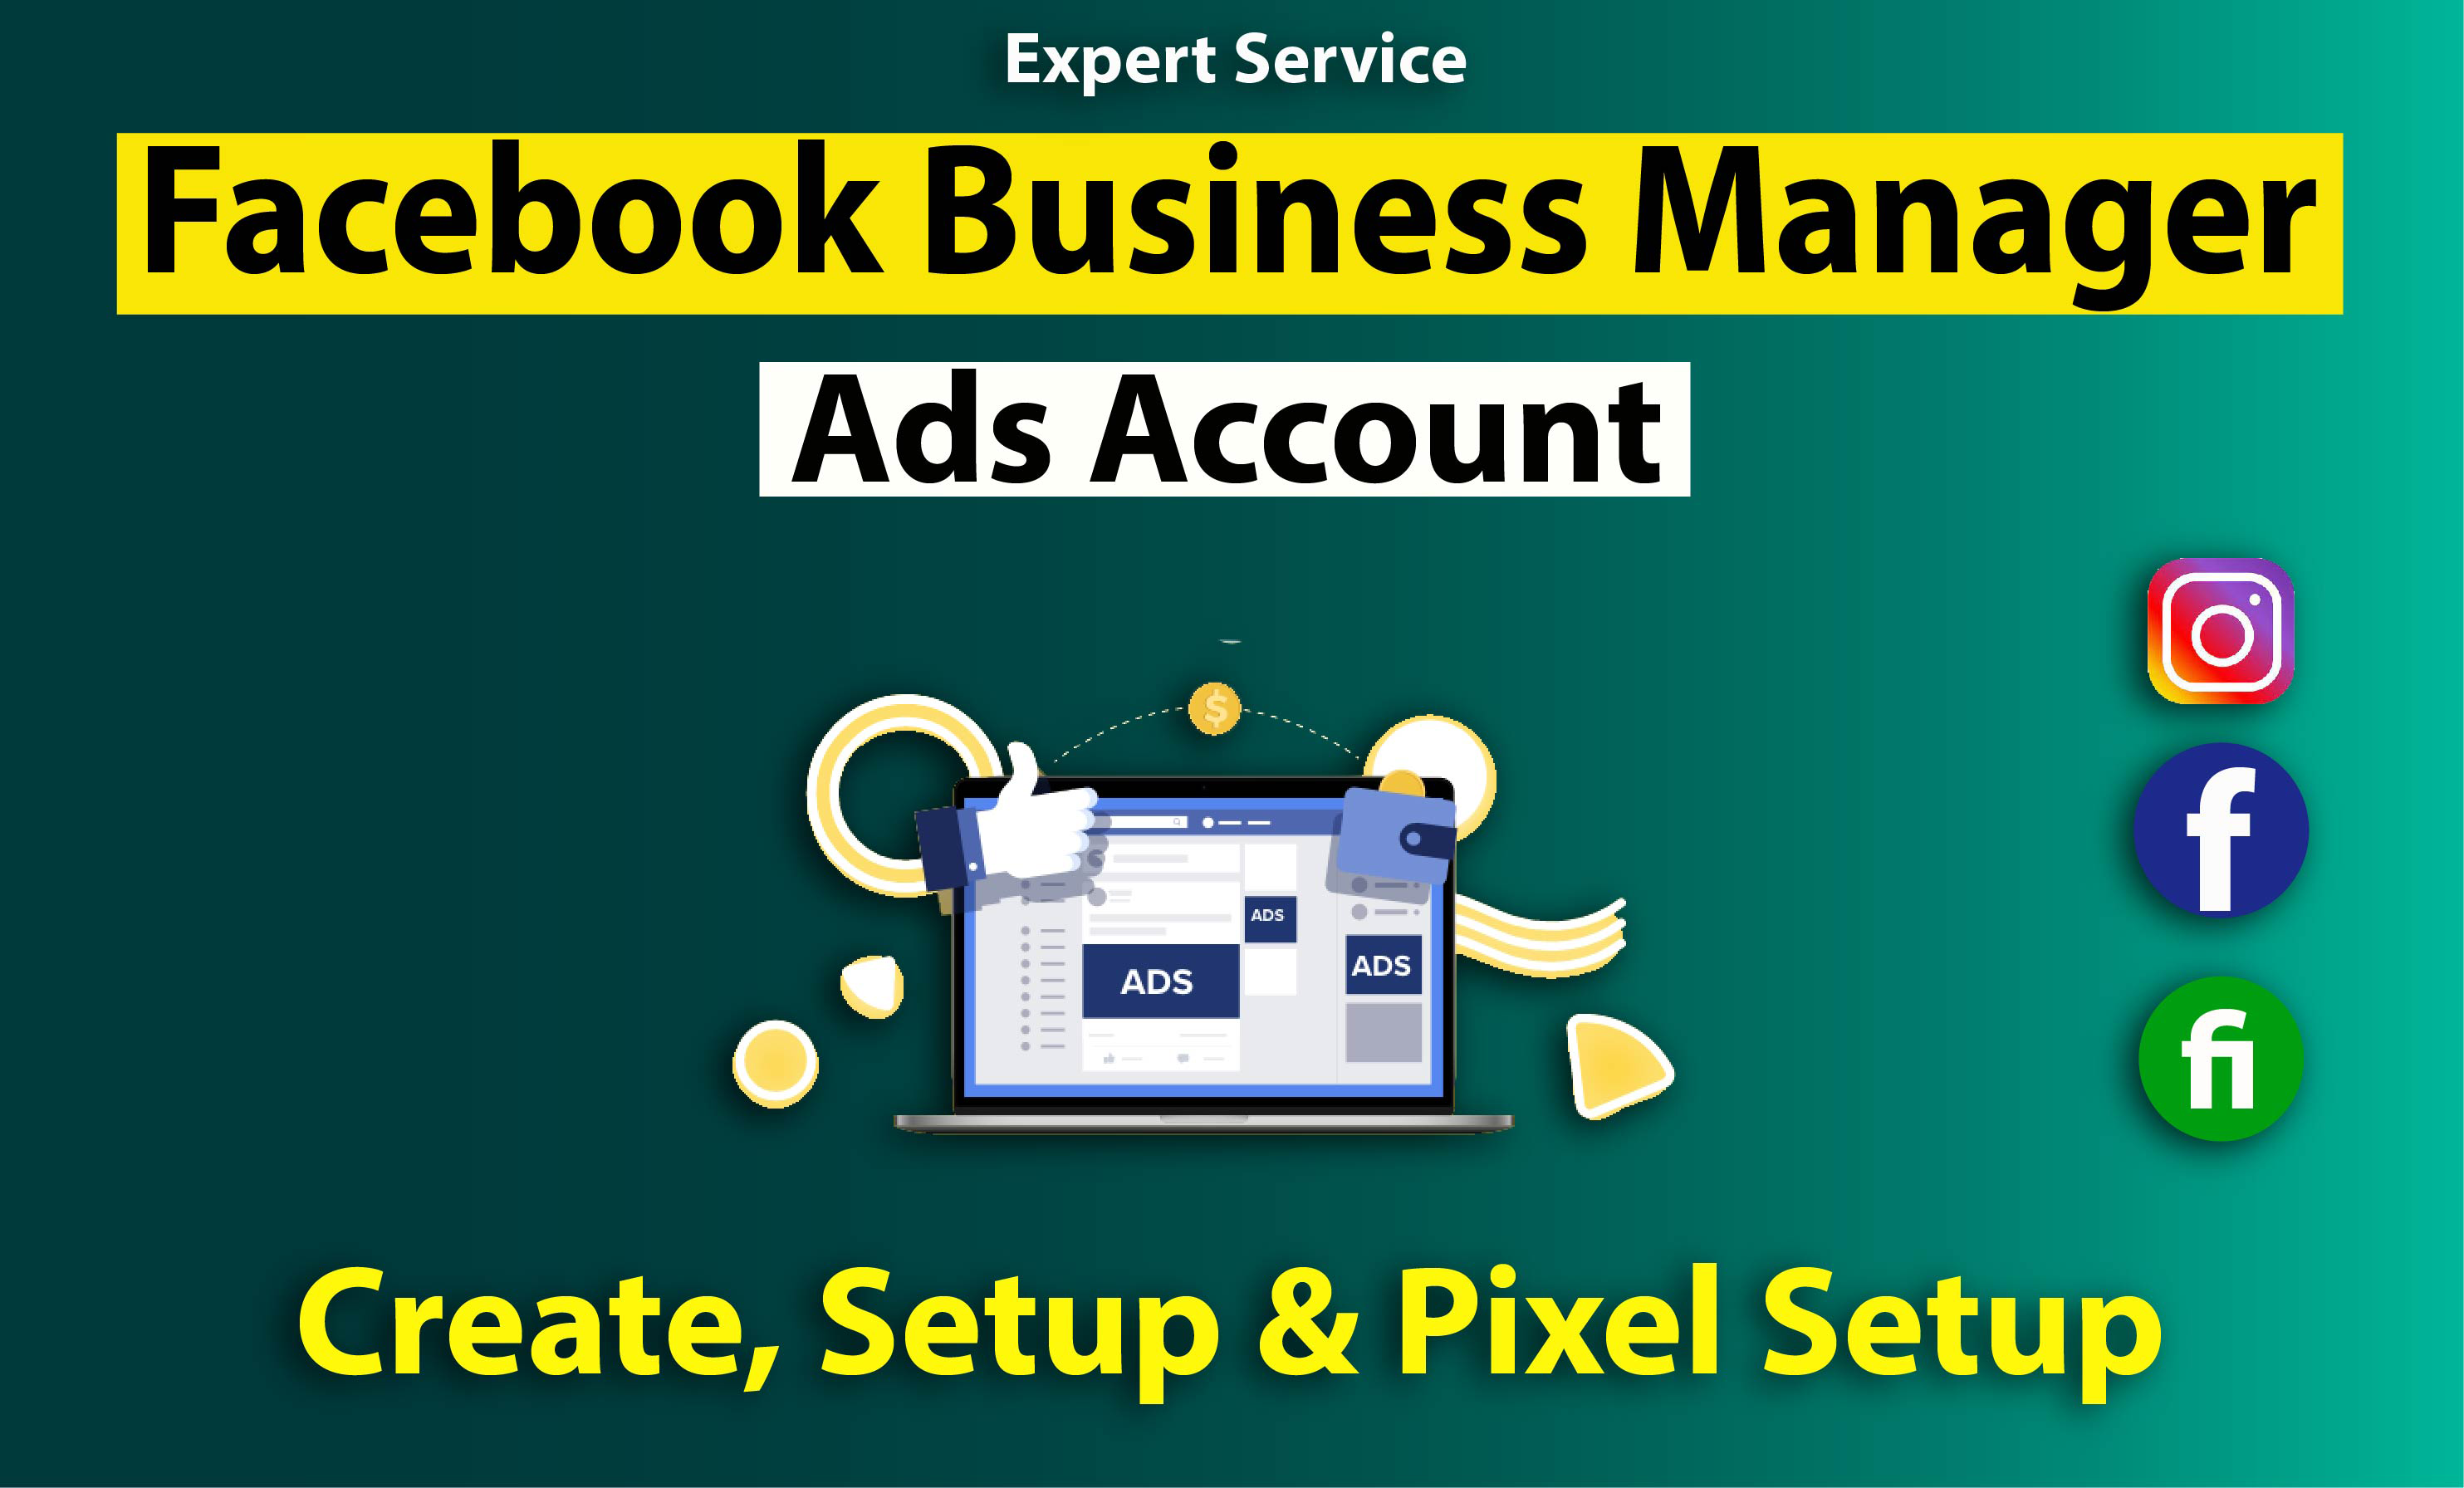 I will create facebook business manager, ads account and fix pixel issue, FiverrBox